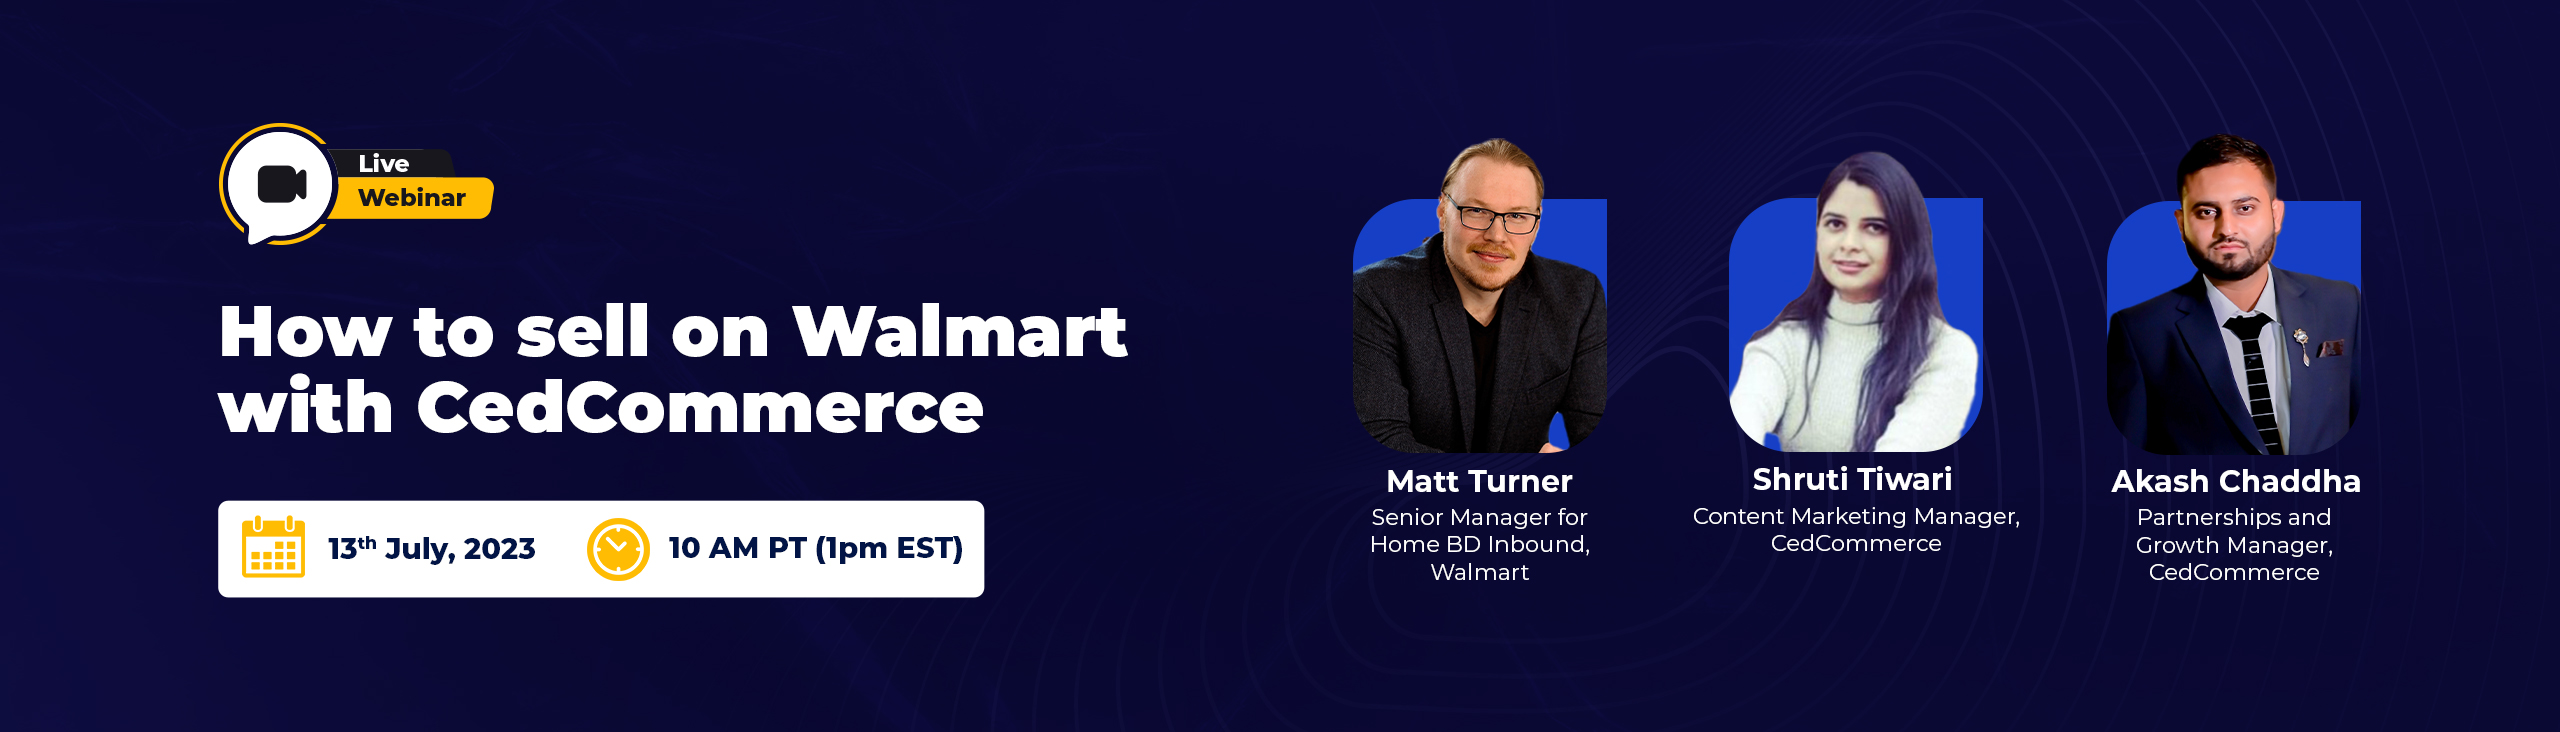 How To Sell on Walmart Marketplace with CedCommerce?